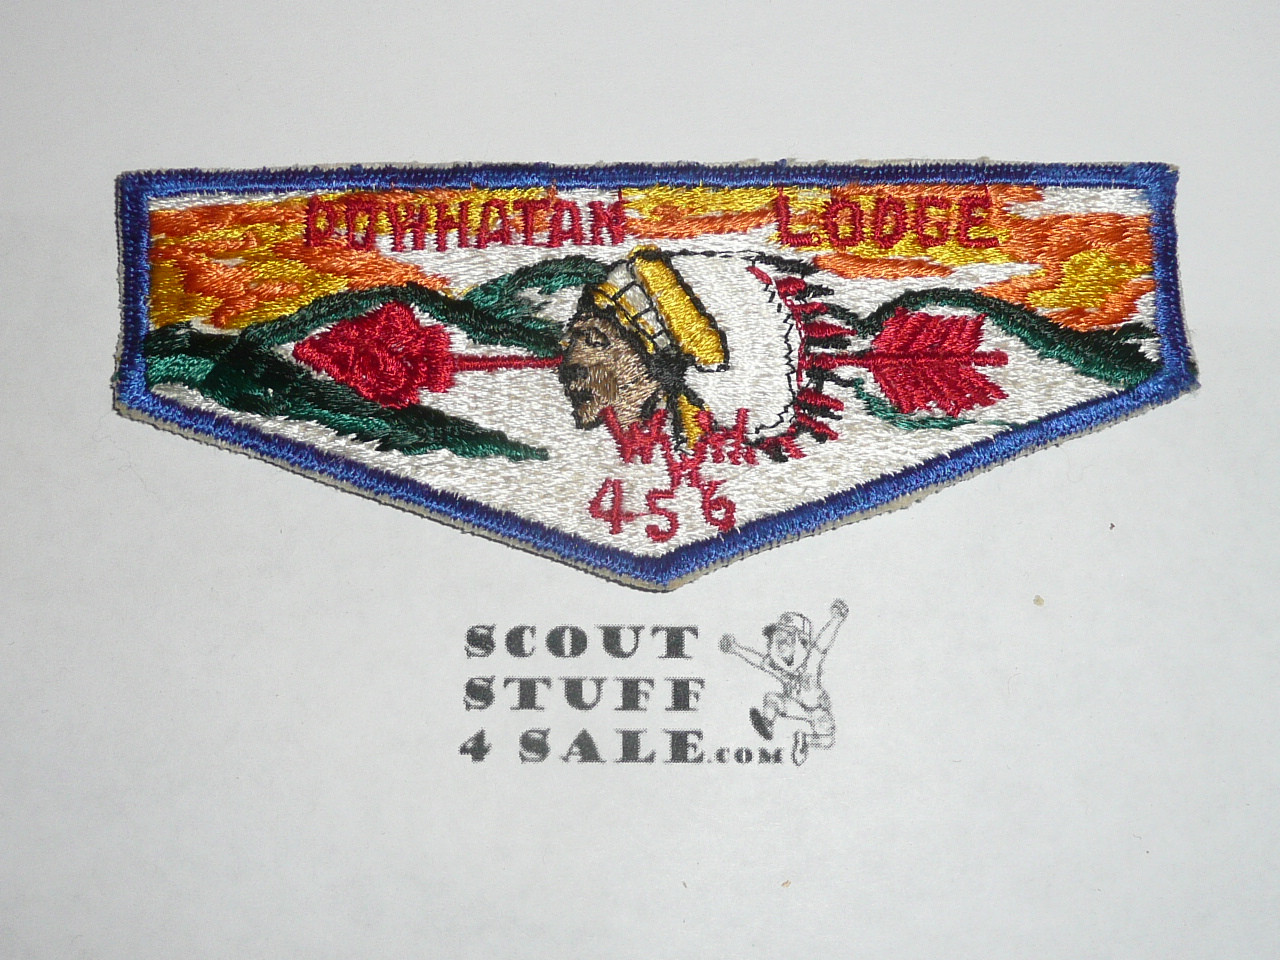 Order of the Arrow Lodge #456 Powhatan s1 Flap Patch